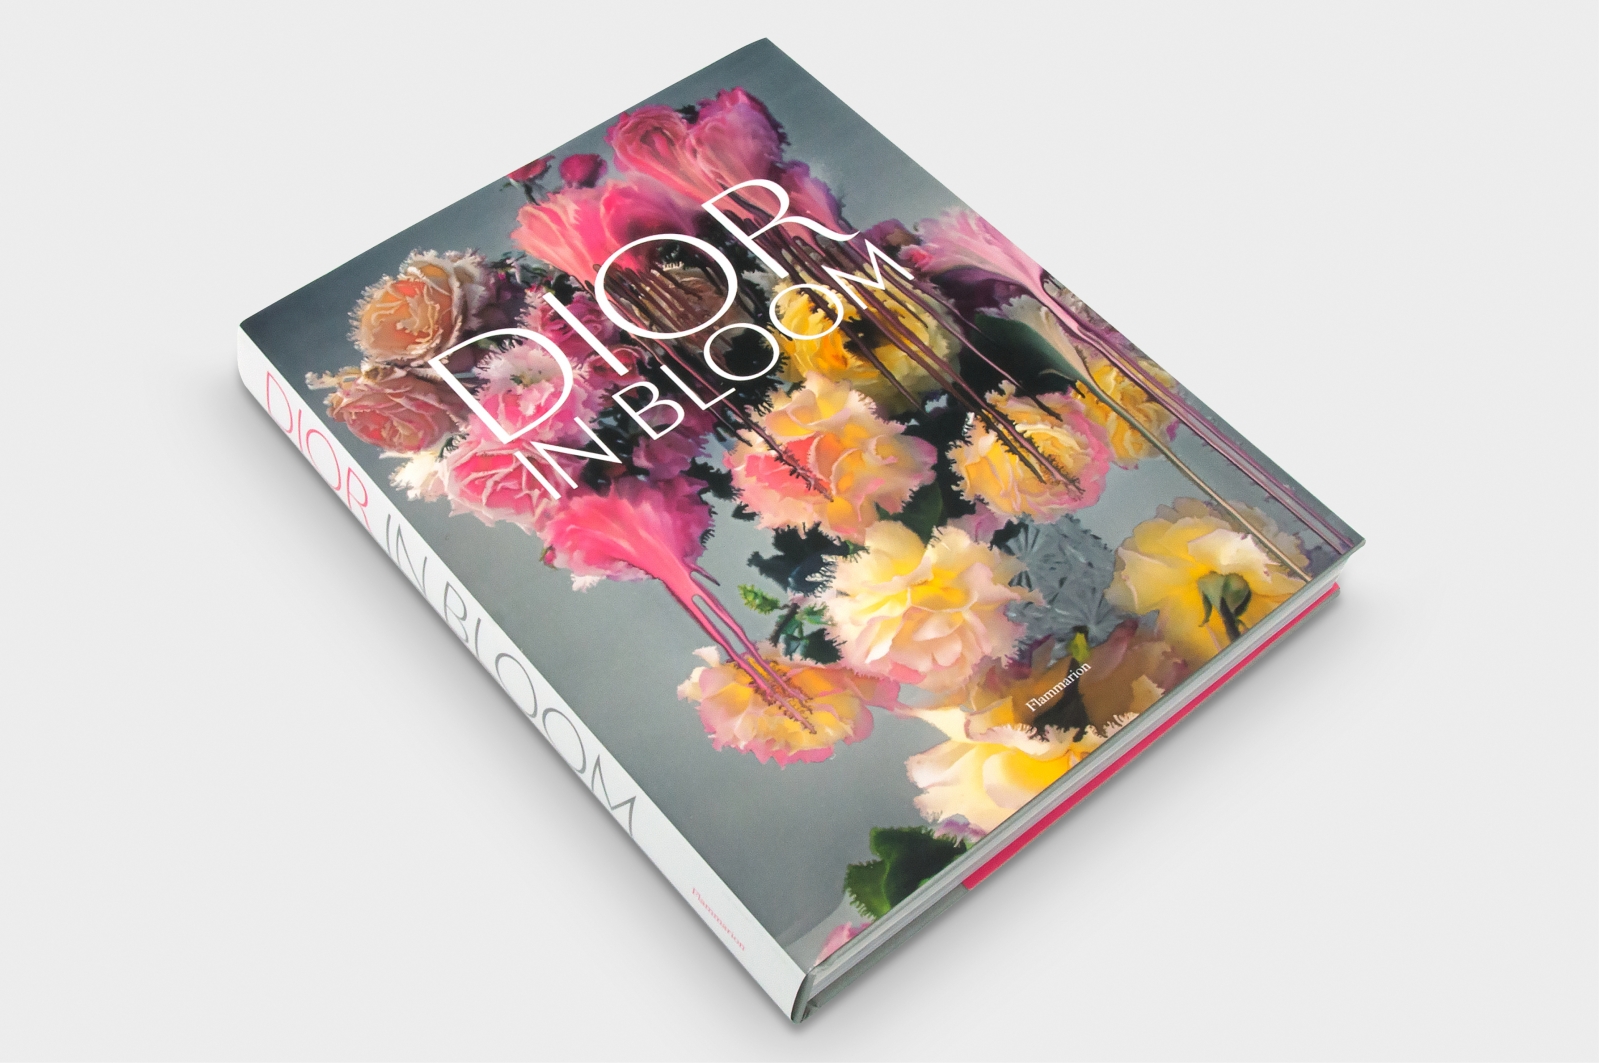 Dior In Bloom